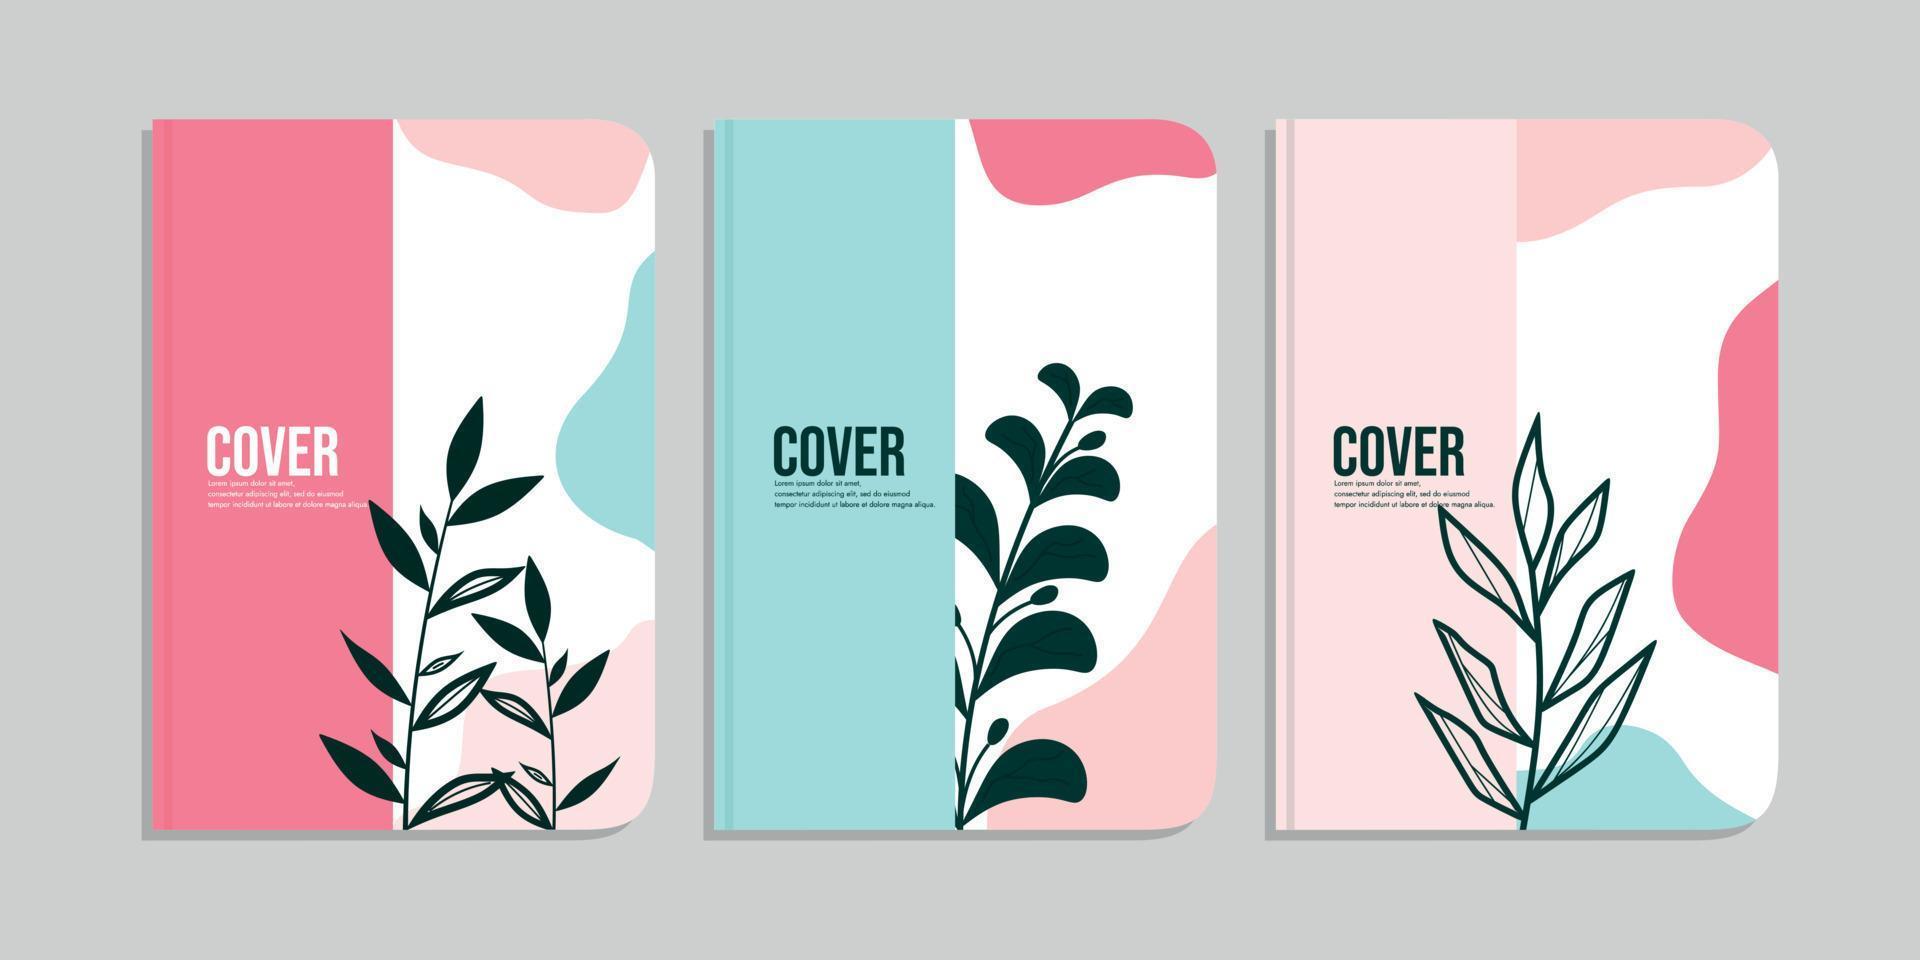 set of school book cover designs with hand drawn floral decorations. abstract retro botanical background. A4 size For notebooks, invitations, planners, brochures, books, catalogs vector